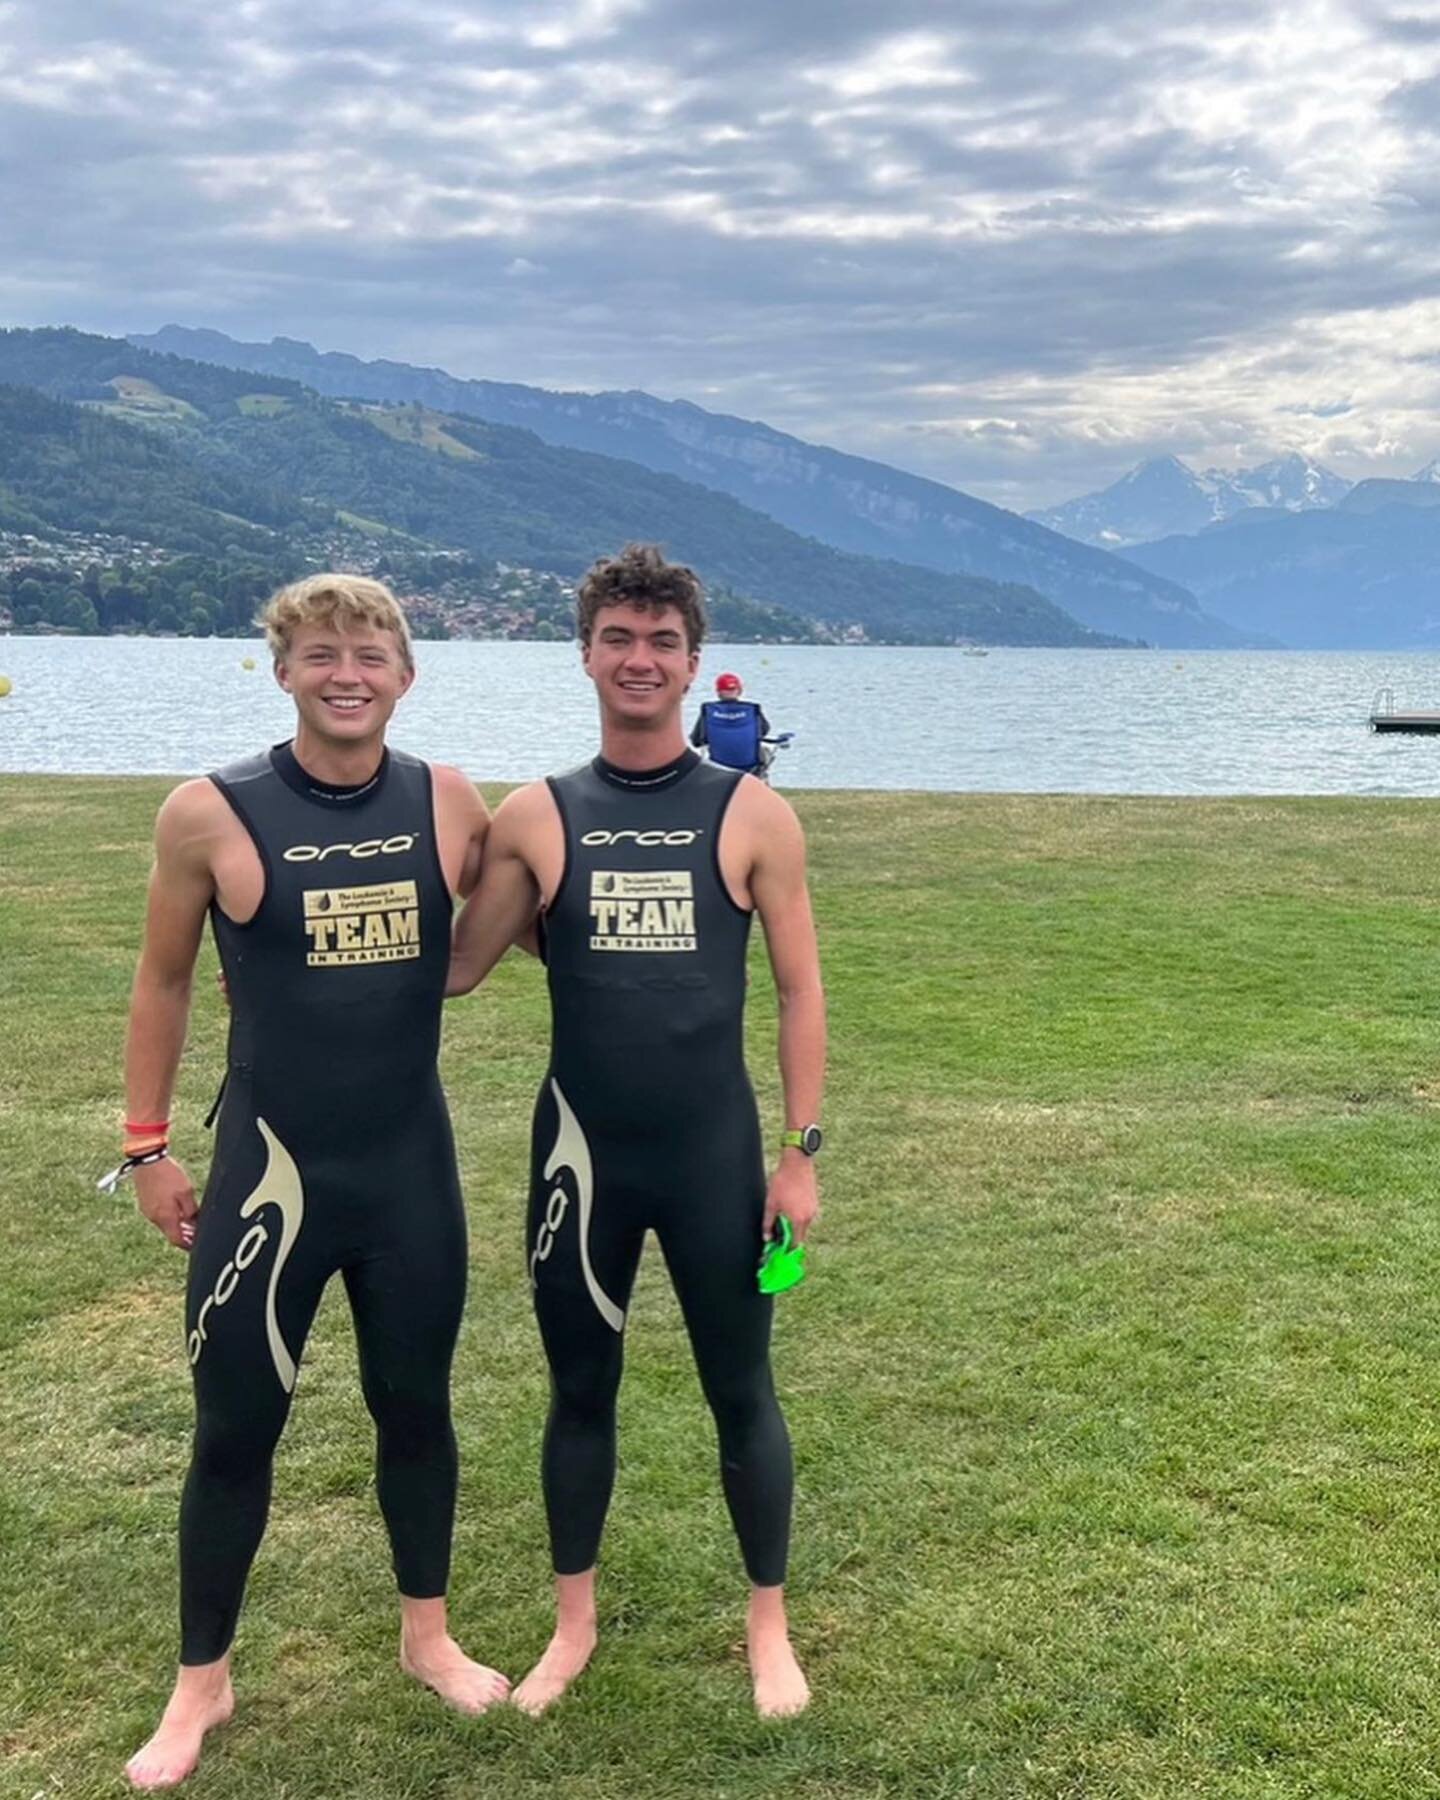 This week, brothers @colekettner and @grant.gaffney had the amazing opportunity to compete in the Iron Man Race in Thun, Switzerland. This triathlon consisted of a 2.4 mile swim, 112 mile bike ride, and a 26.2 mile run, which had to be completed in u